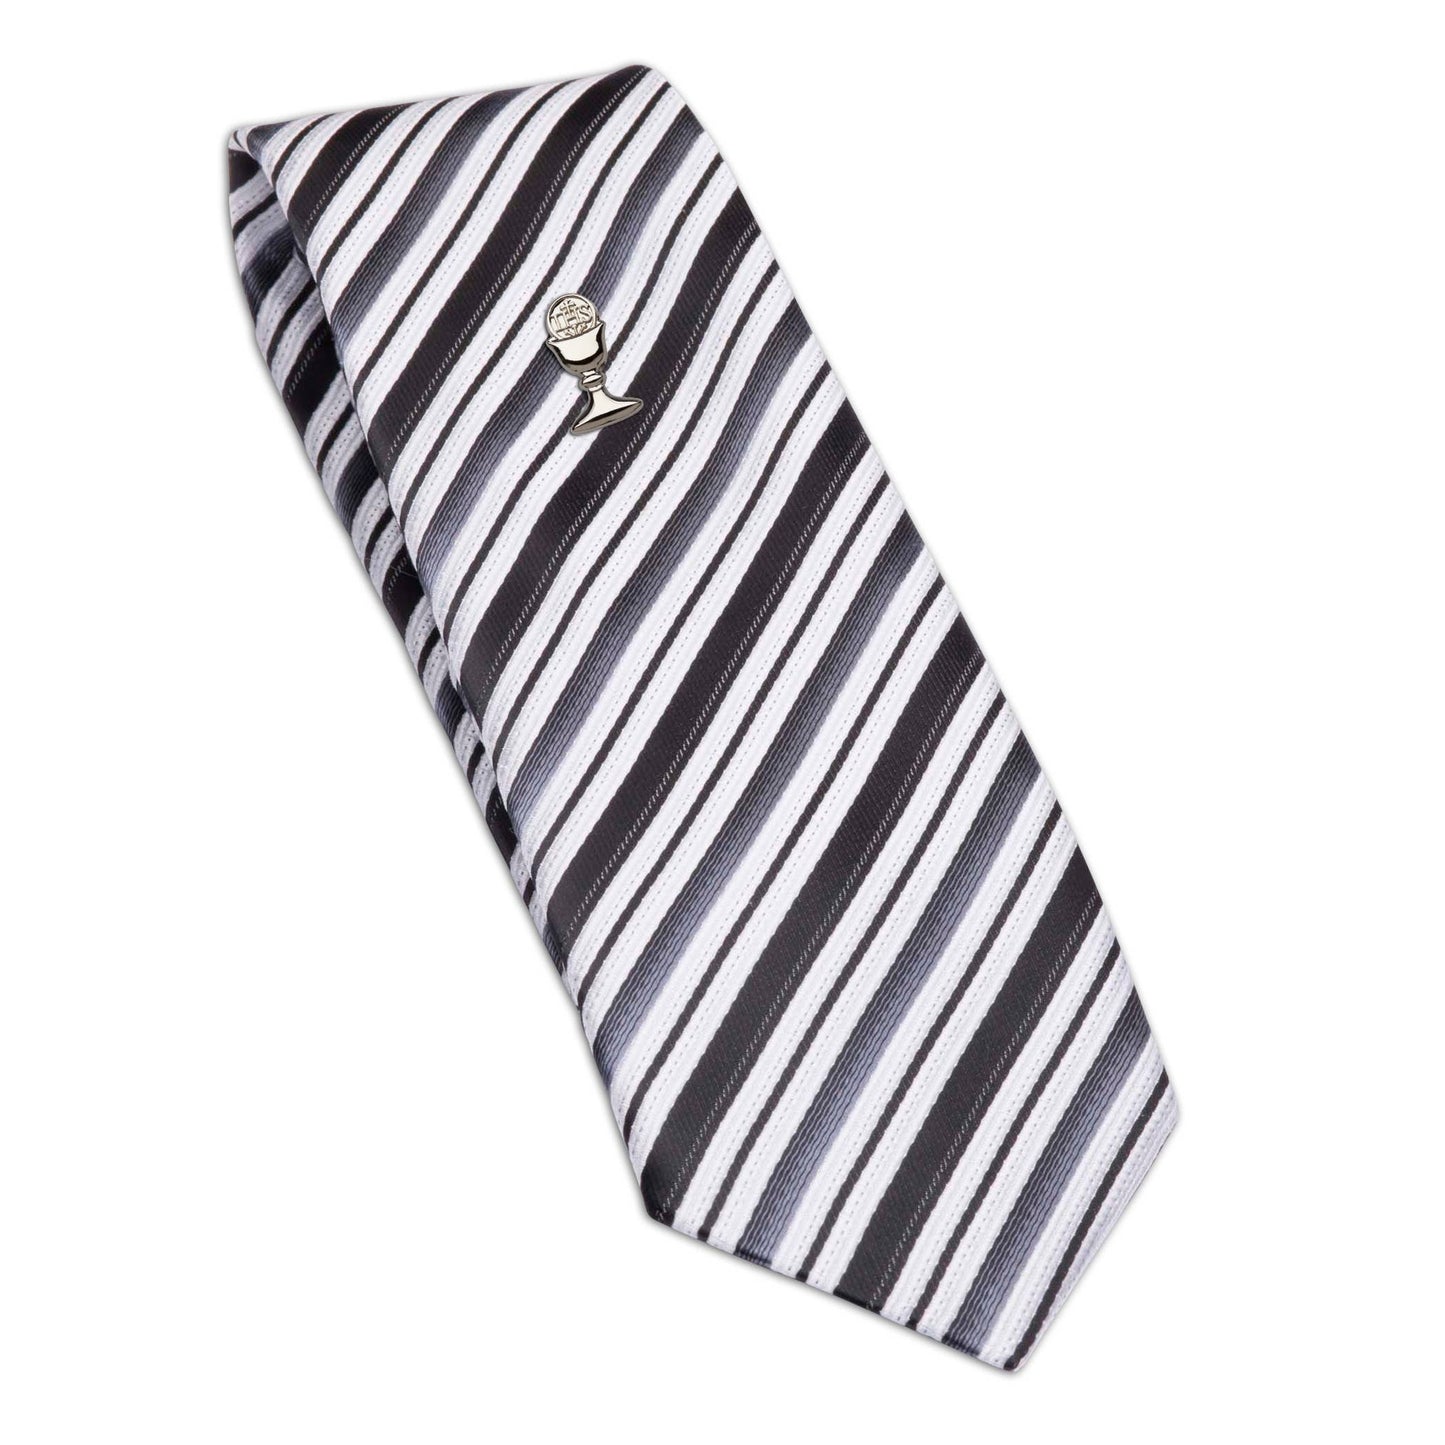 Black Stripe / Silver-tone Boy's First Communion Tie and Chalice Pin Set